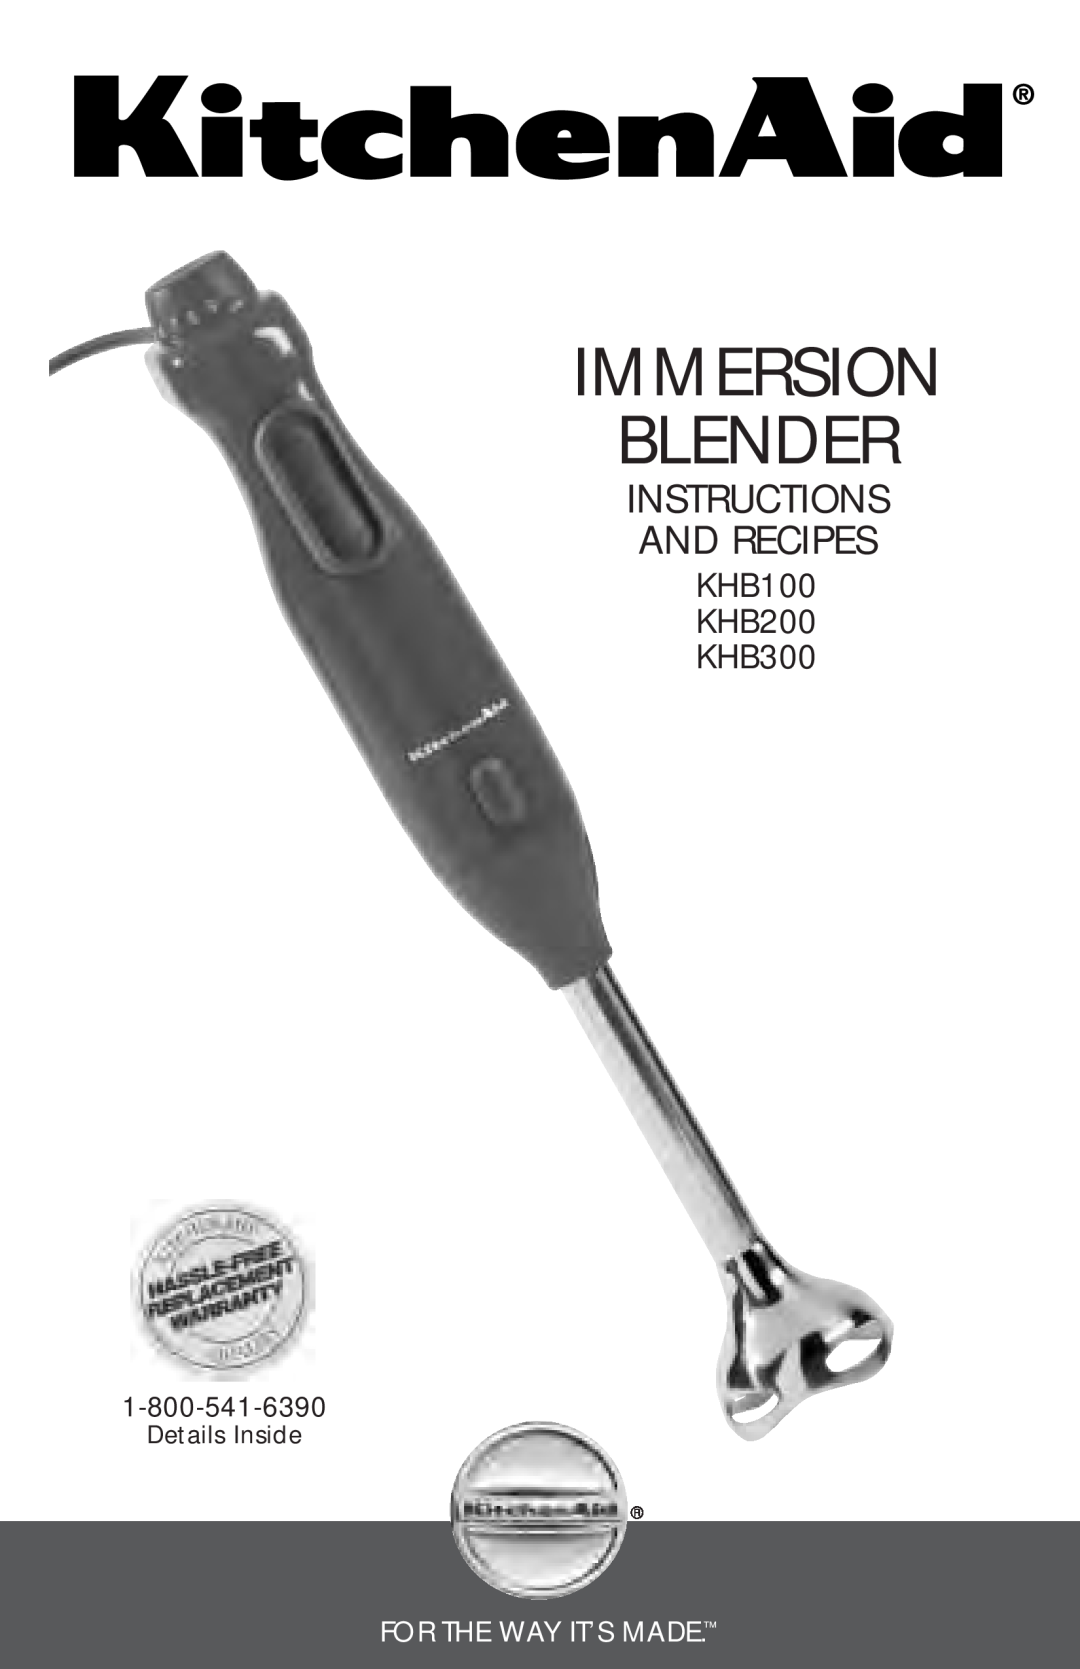 KitchenAid manual Immersion Blender, Instructions And Recipes, KHB100 KHB200 KHB300, For The Way It’S Made 